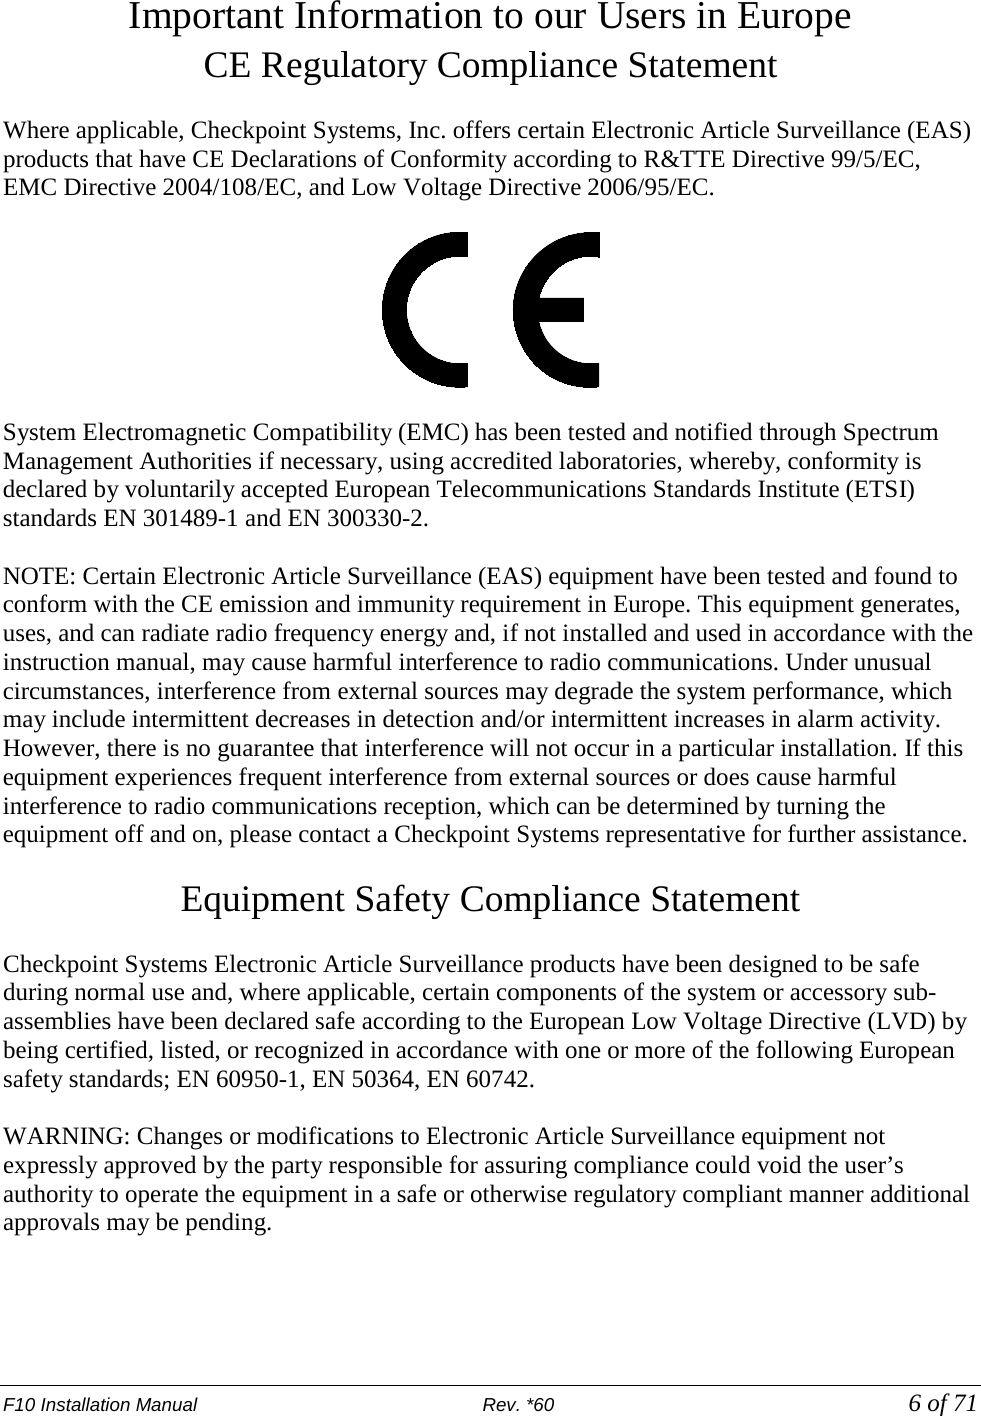 F10 Installation Manual                          Rev. *60            6 of 71 Important Information to our Users in Europe CE Regulatory Compliance Statement  Where applicable, Checkpoint Systems, Inc. offers certain Electronic Article Surveillance (EAS) products that have CE Declarations of Conformity according to R&amp;TTE Directive 99/5/EC, EMC Directive 2004/108/EC, and Low Voltage Directive 2006/95/EC.    System Electromagnetic Compatibility (EMC) has been tested and notified through Spectrum Management Authorities if necessary, using accredited laboratories, whereby, conformity is declared by voluntarily accepted European Telecommunications Standards Institute (ETSI) standards EN 301489-1 and EN 300330-2.  NOTE: Certain Electronic Article Surveillance (EAS) equipment have been tested and found to conform with the CE emission and immunity requirement in Europe. This equipment generates, uses, and can radiate radio frequency energy and, if not installed and used in accordance with the instruction manual, may cause harmful interference to radio communications. Under unusual circumstances, interference from external sources may degrade the system performance, which may include intermittent decreases in detection and/or intermittent increases in alarm activity. However, there is no guarantee that interference will not occur in a particular installation. If this equipment experiences frequent interference from external sources or does cause harmful interference to radio communications reception, which can be determined by turning the equipment off and on, please contact a Checkpoint Systems representative for further assistance.  Equipment Safety Compliance Statement  Checkpoint Systems Electronic Article Surveillance products have been designed to be safe during normal use and, where applicable, certain components of the system or accessory sub-assemblies have been declared safe according to the European Low Voltage Directive (LVD) by being certified, listed, or recognized in accordance with one or more of the following European safety standards; EN 60950-1, EN 50364, EN 60742.  WARNING: Changes or modifications to Electronic Article Surveillance equipment not expressly approved by the party responsible for assuring compliance could void the user’s authority to operate the equipment in a safe or otherwise regulatory compliant manner additional approvals may be pending.